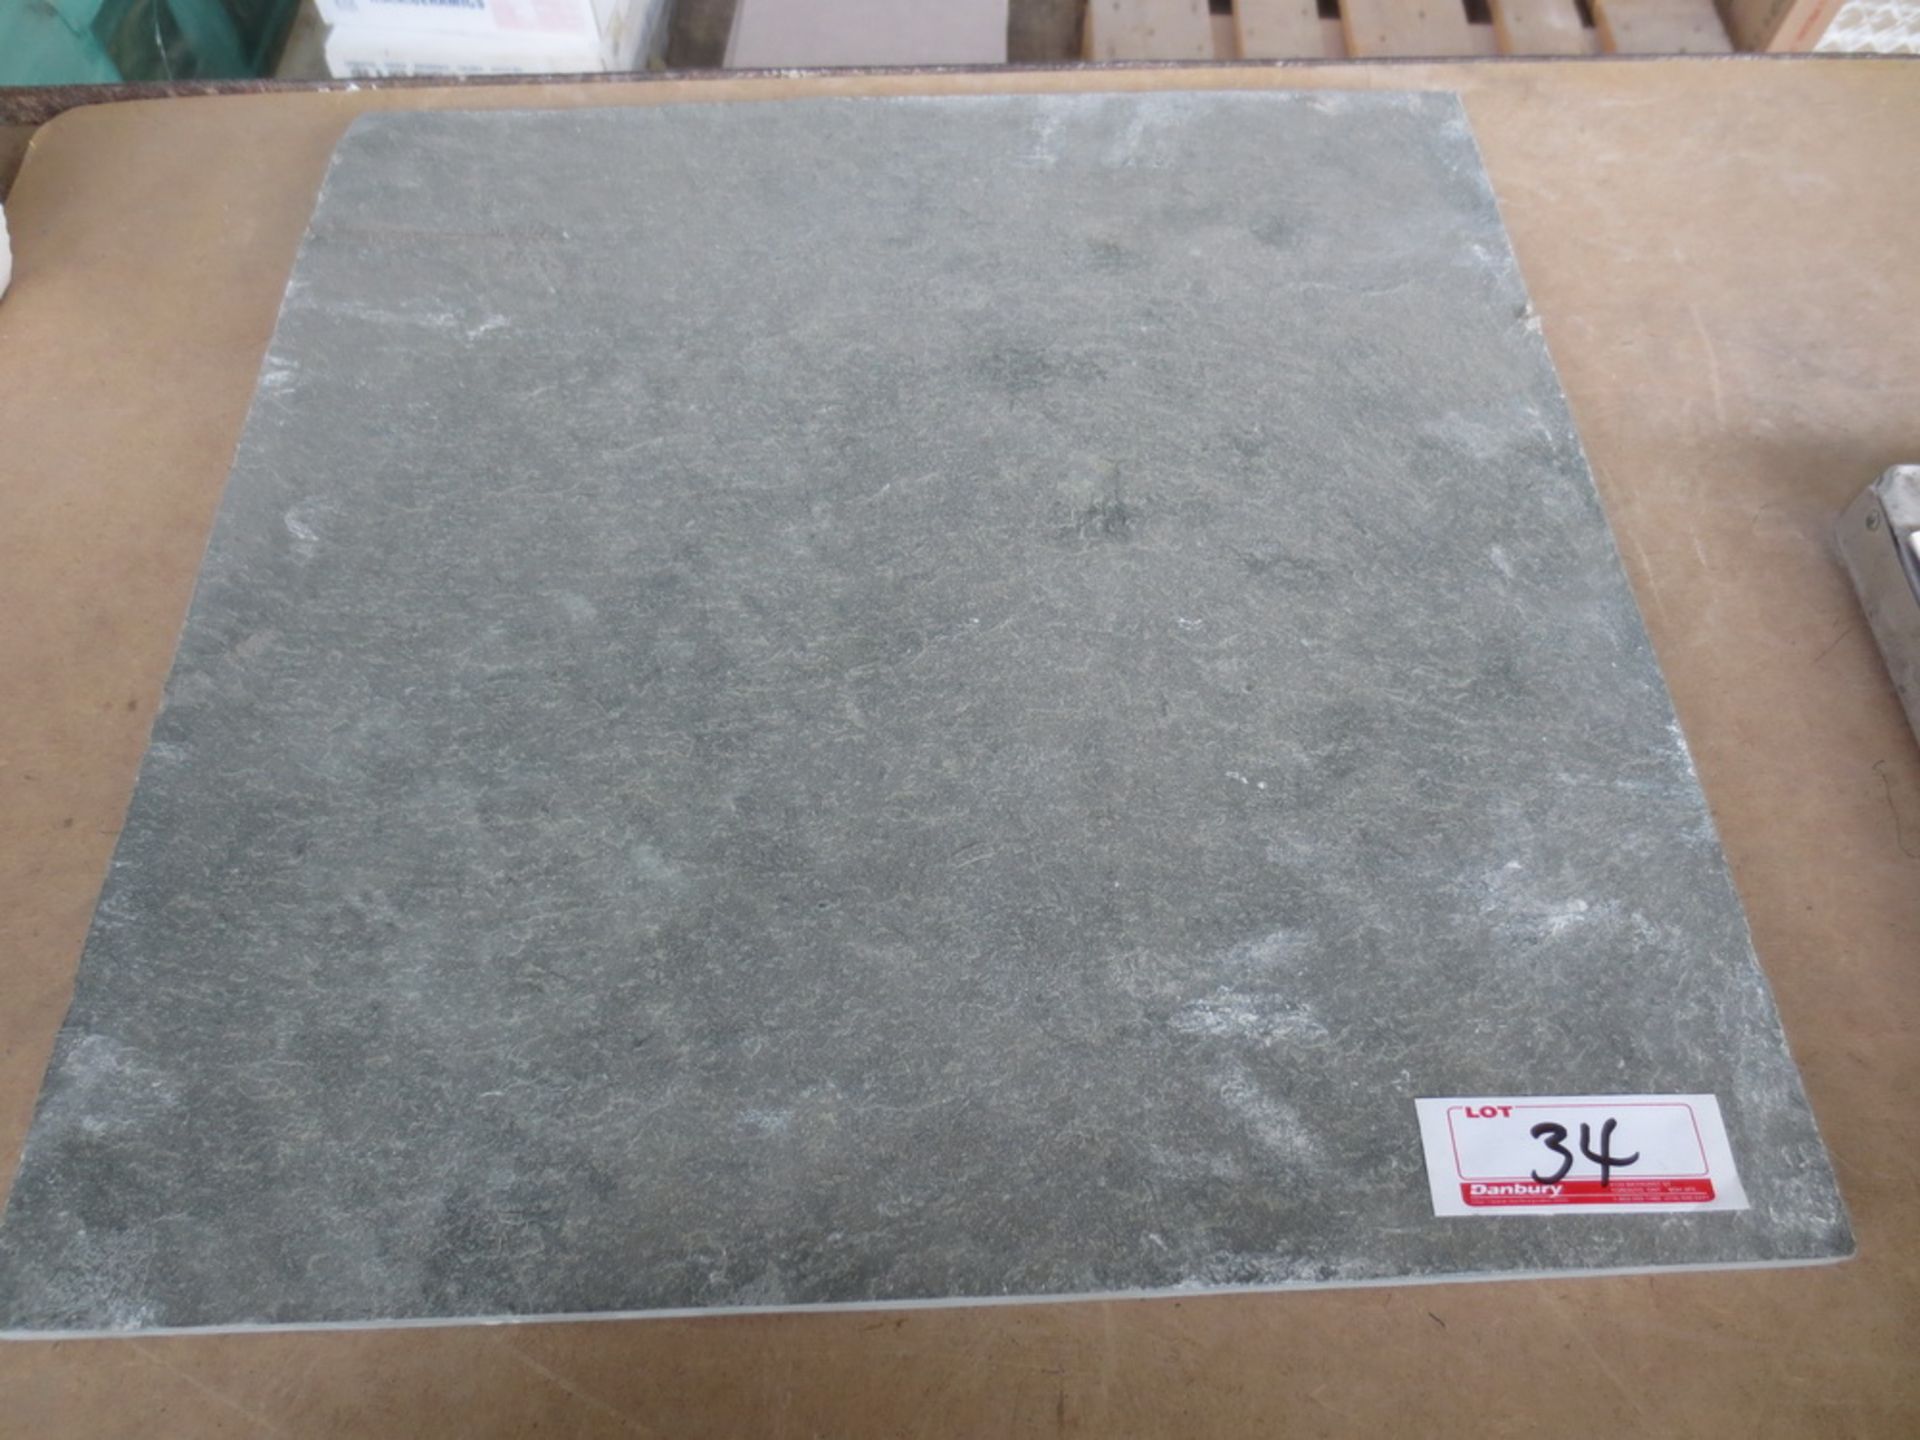 213 - SQ. FT. GREEN APPROX 153/4X153/4 SLATE TILE 24 BOXES